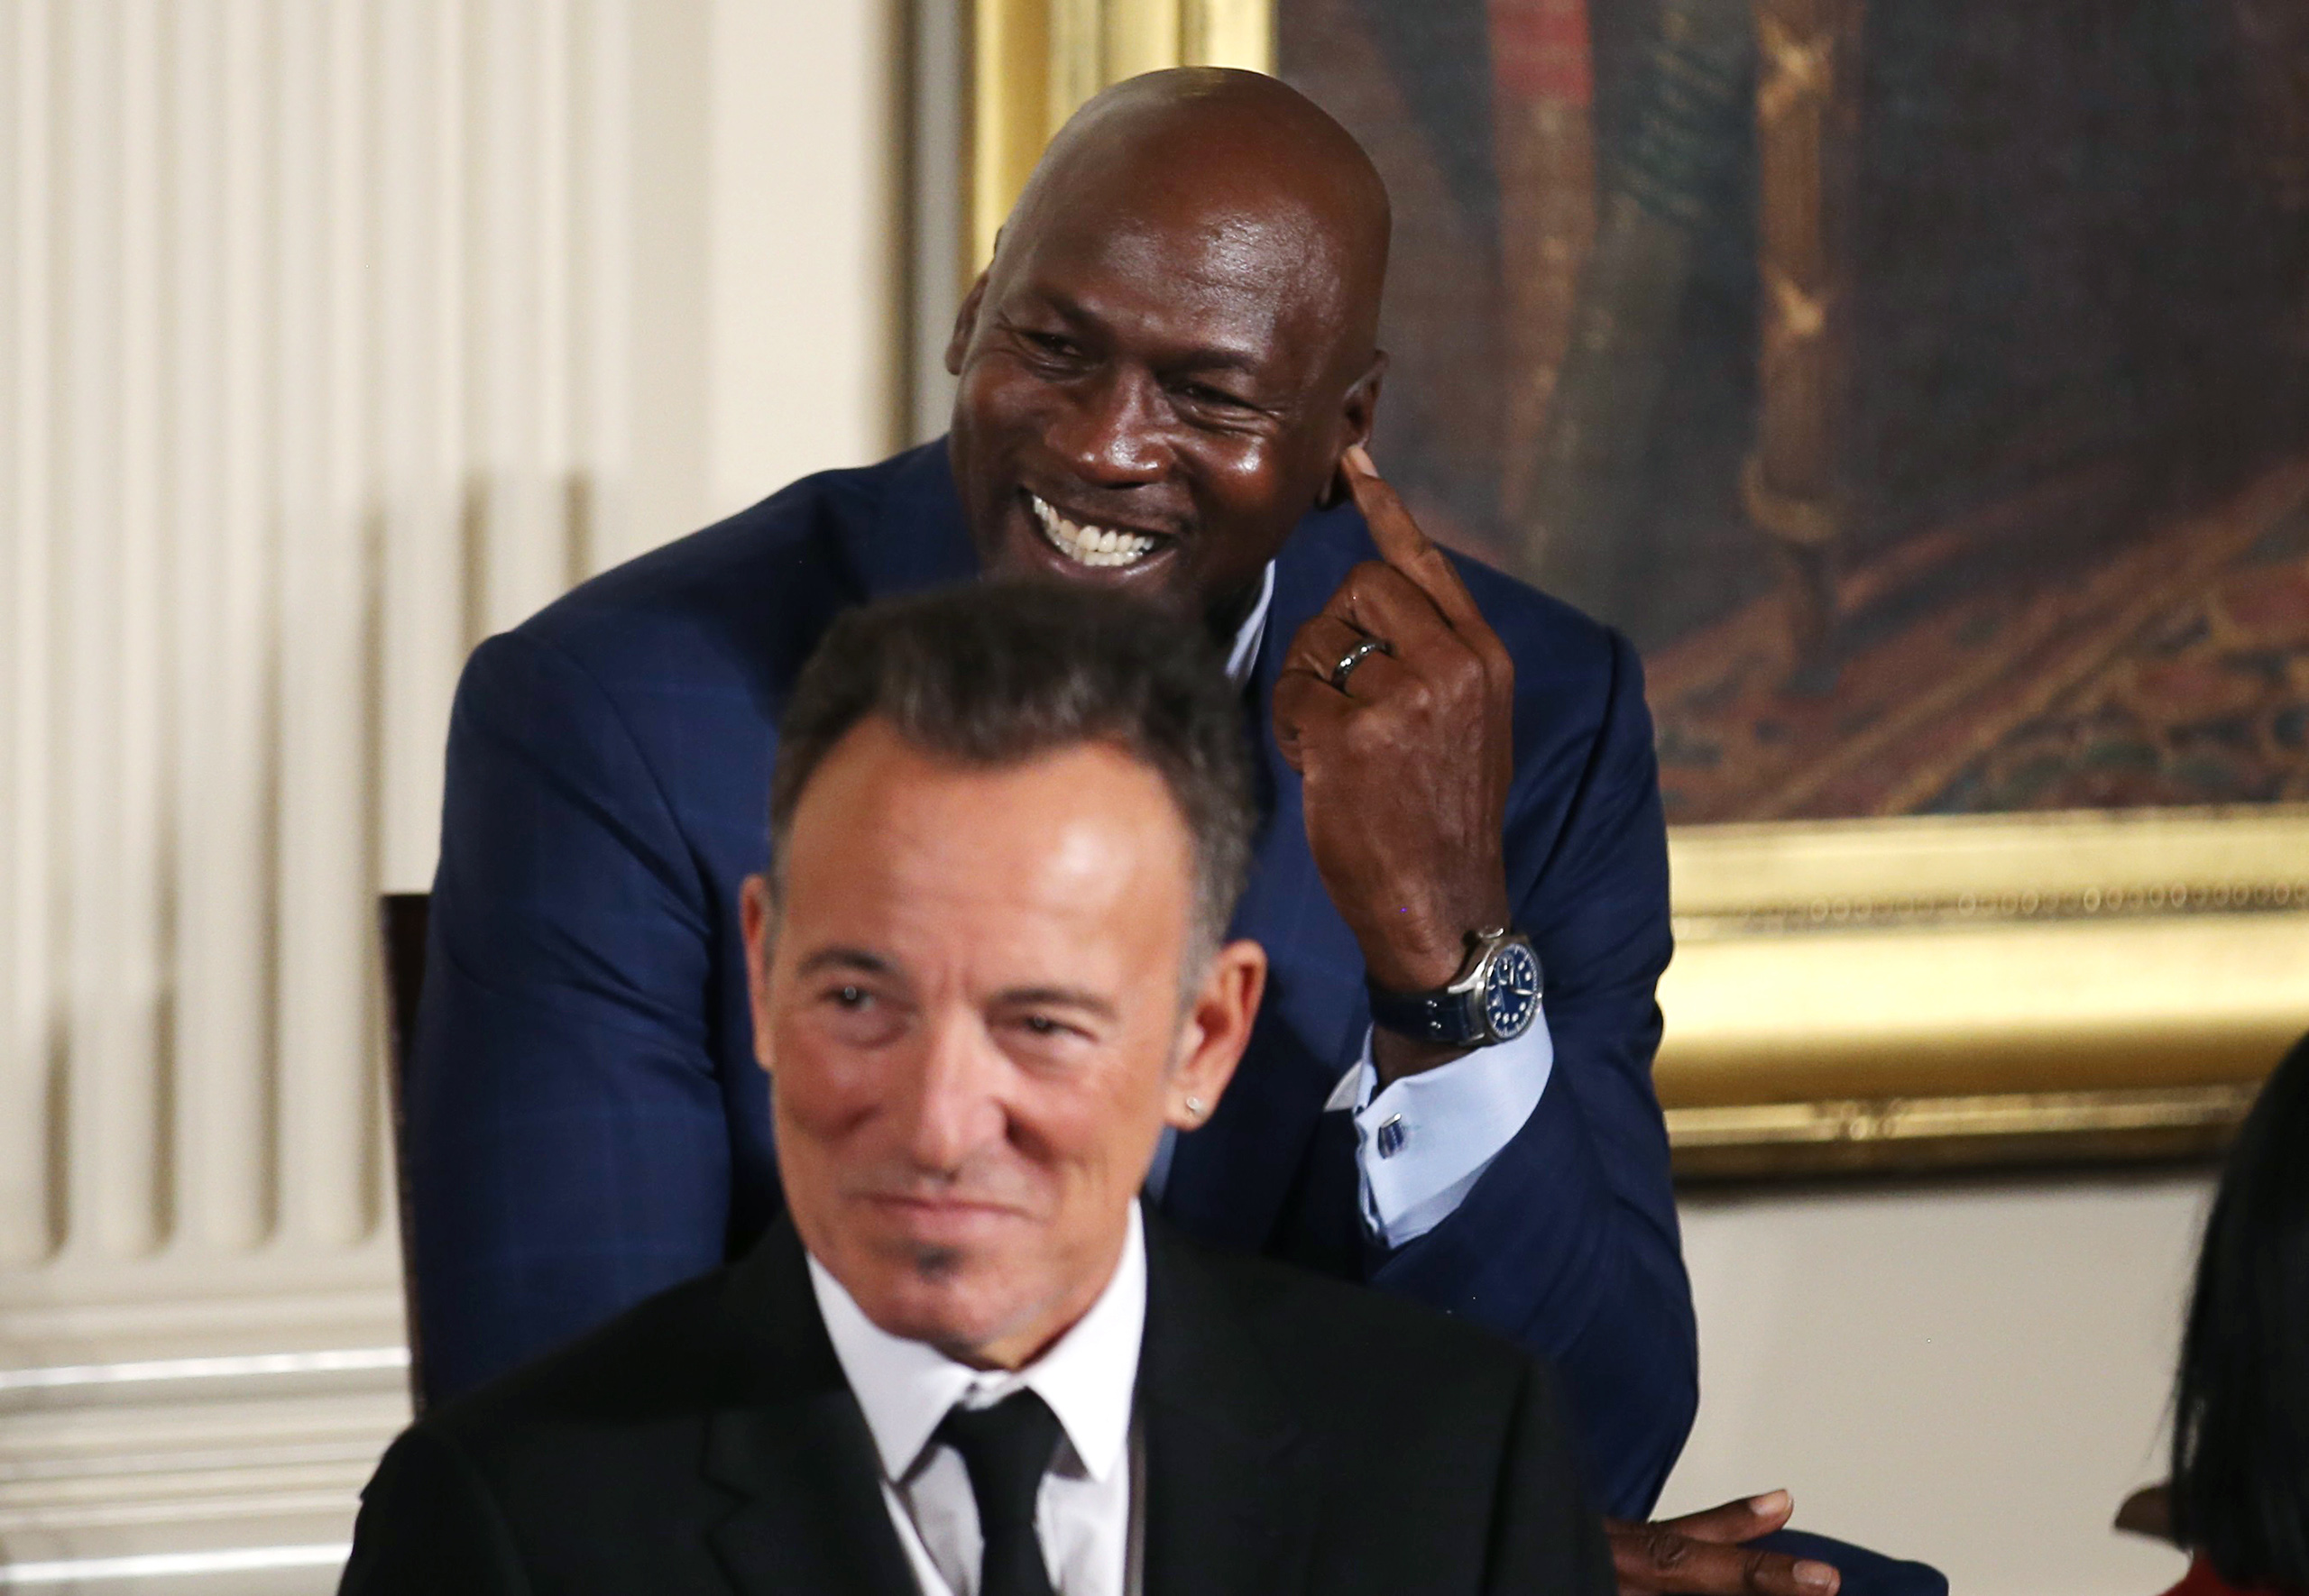 NBA star Jordan and musician Springsteen attend Presidential Medal of Freedom ceremony at White House in Washington